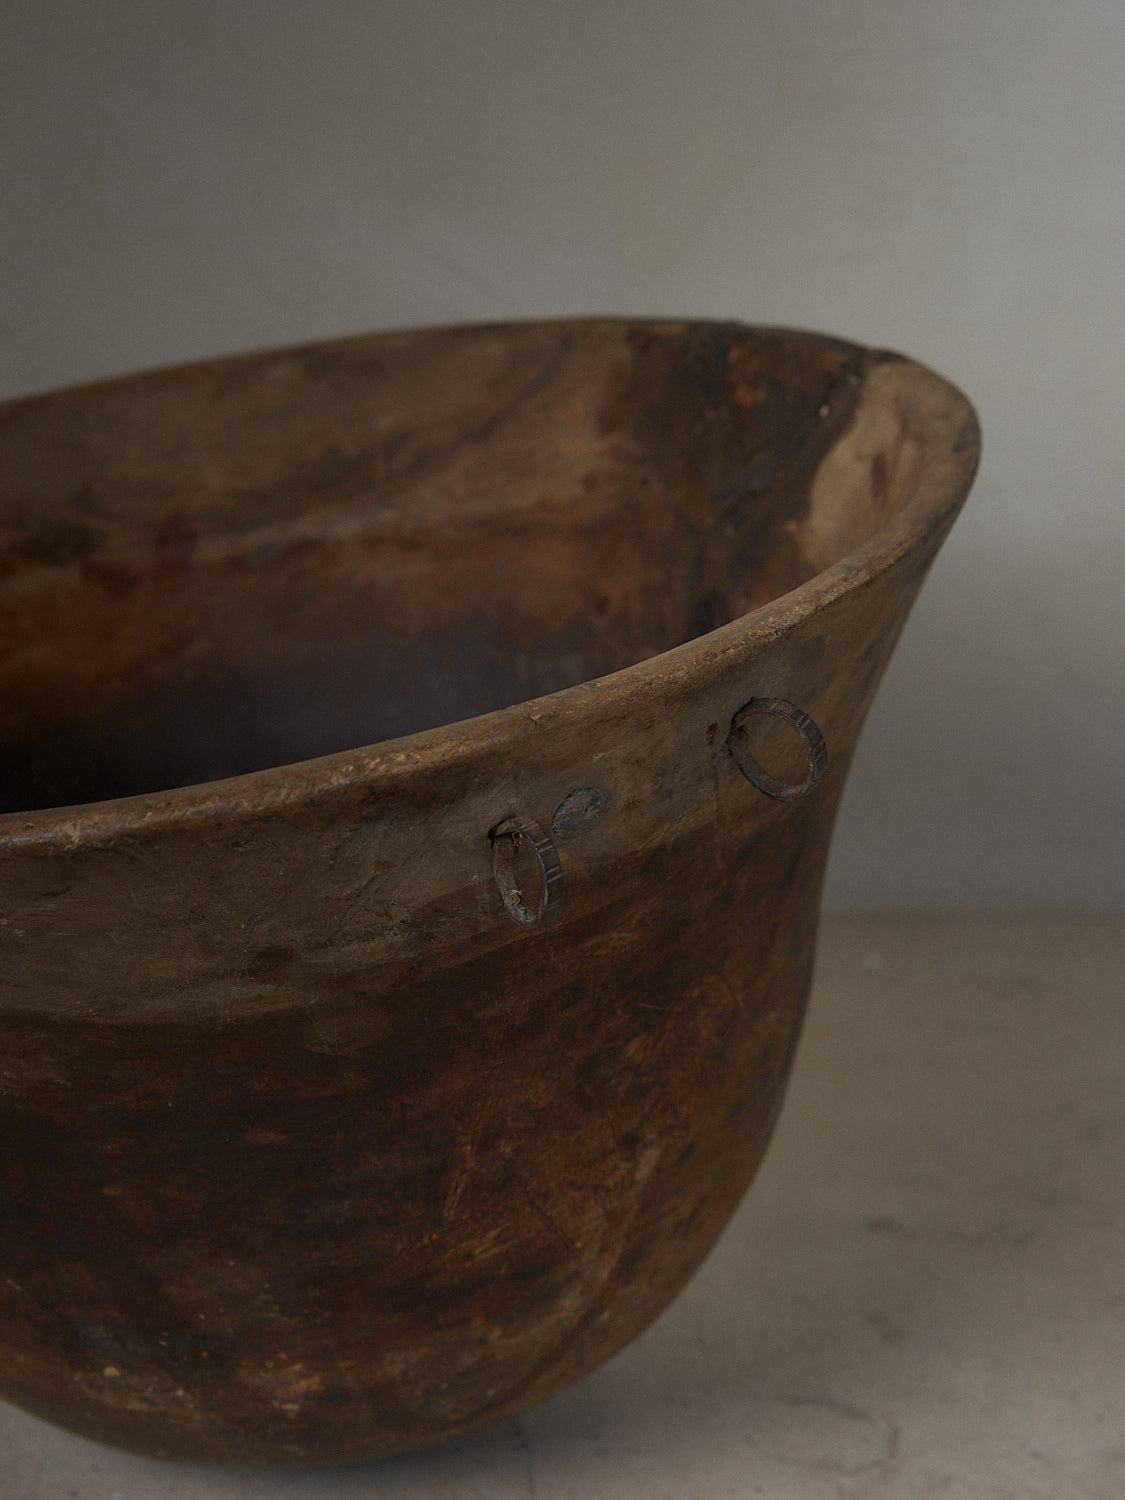 Bowl Tuareg. Rare vintage find. Authentic, oversized wood bowl from the Tuareg peoples in West Africa featuring a wide, open rim and original hardware repair details.